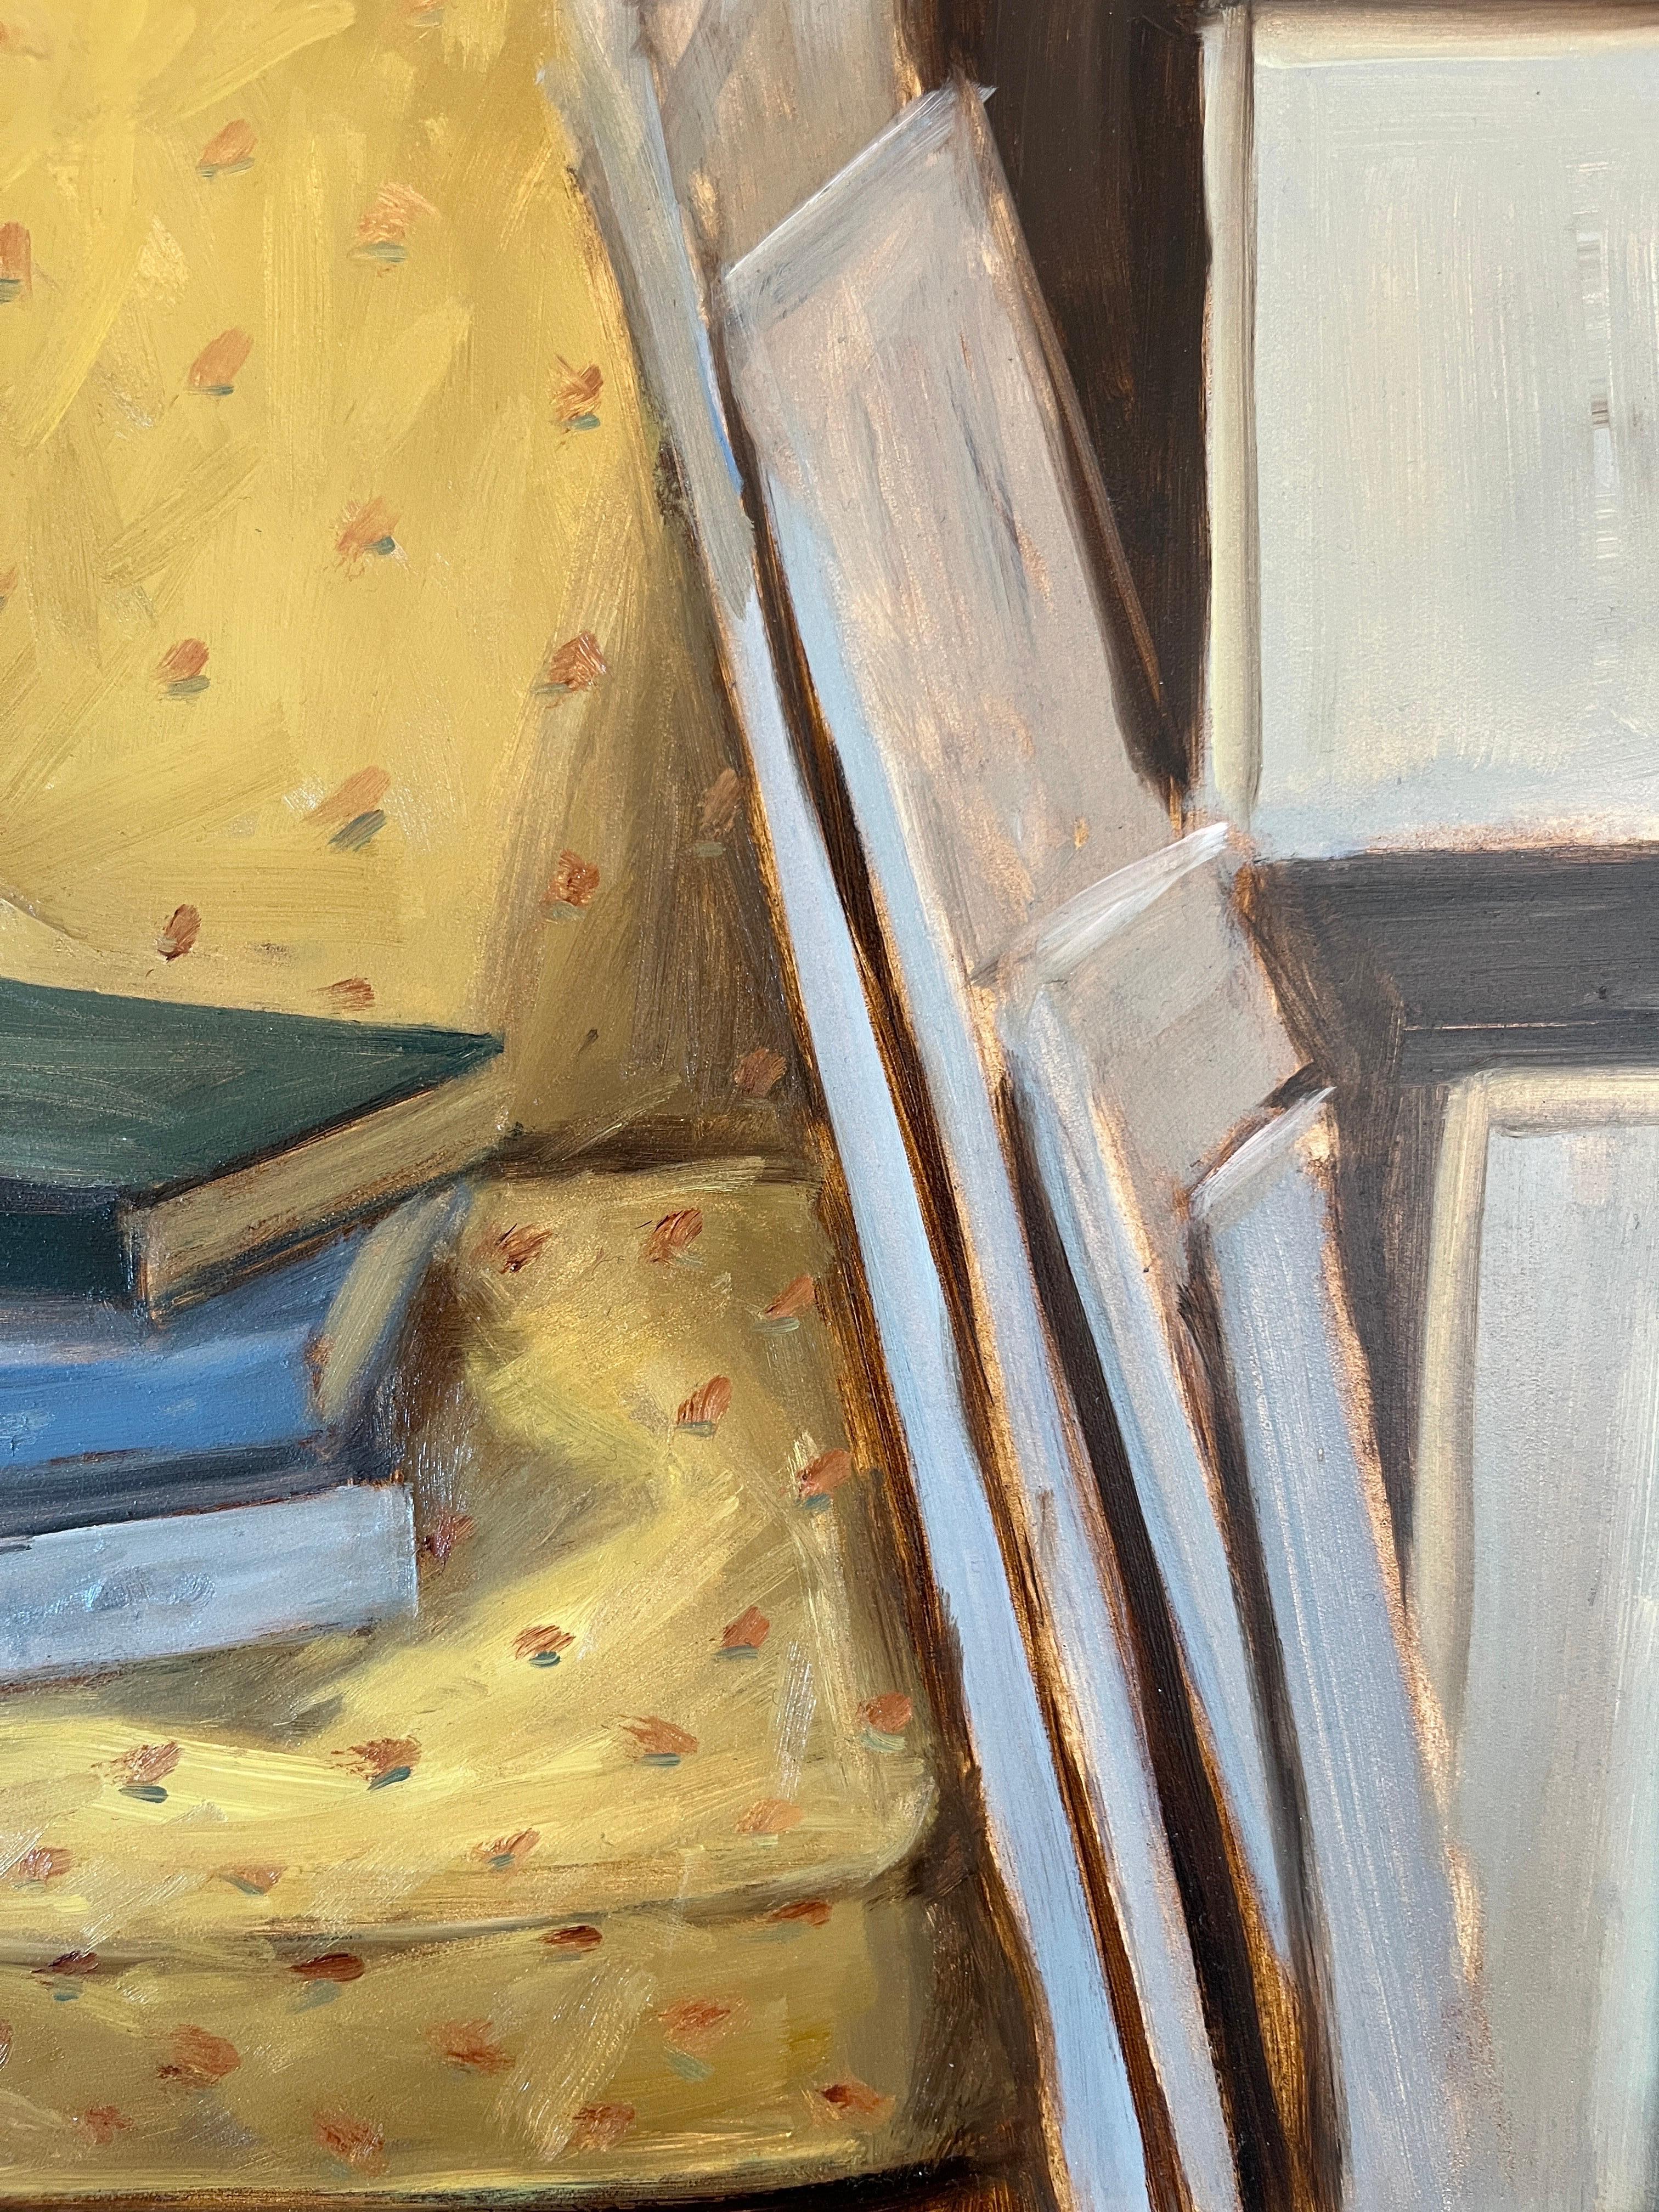 The Yellow Chair - Painting by Ginny Williams